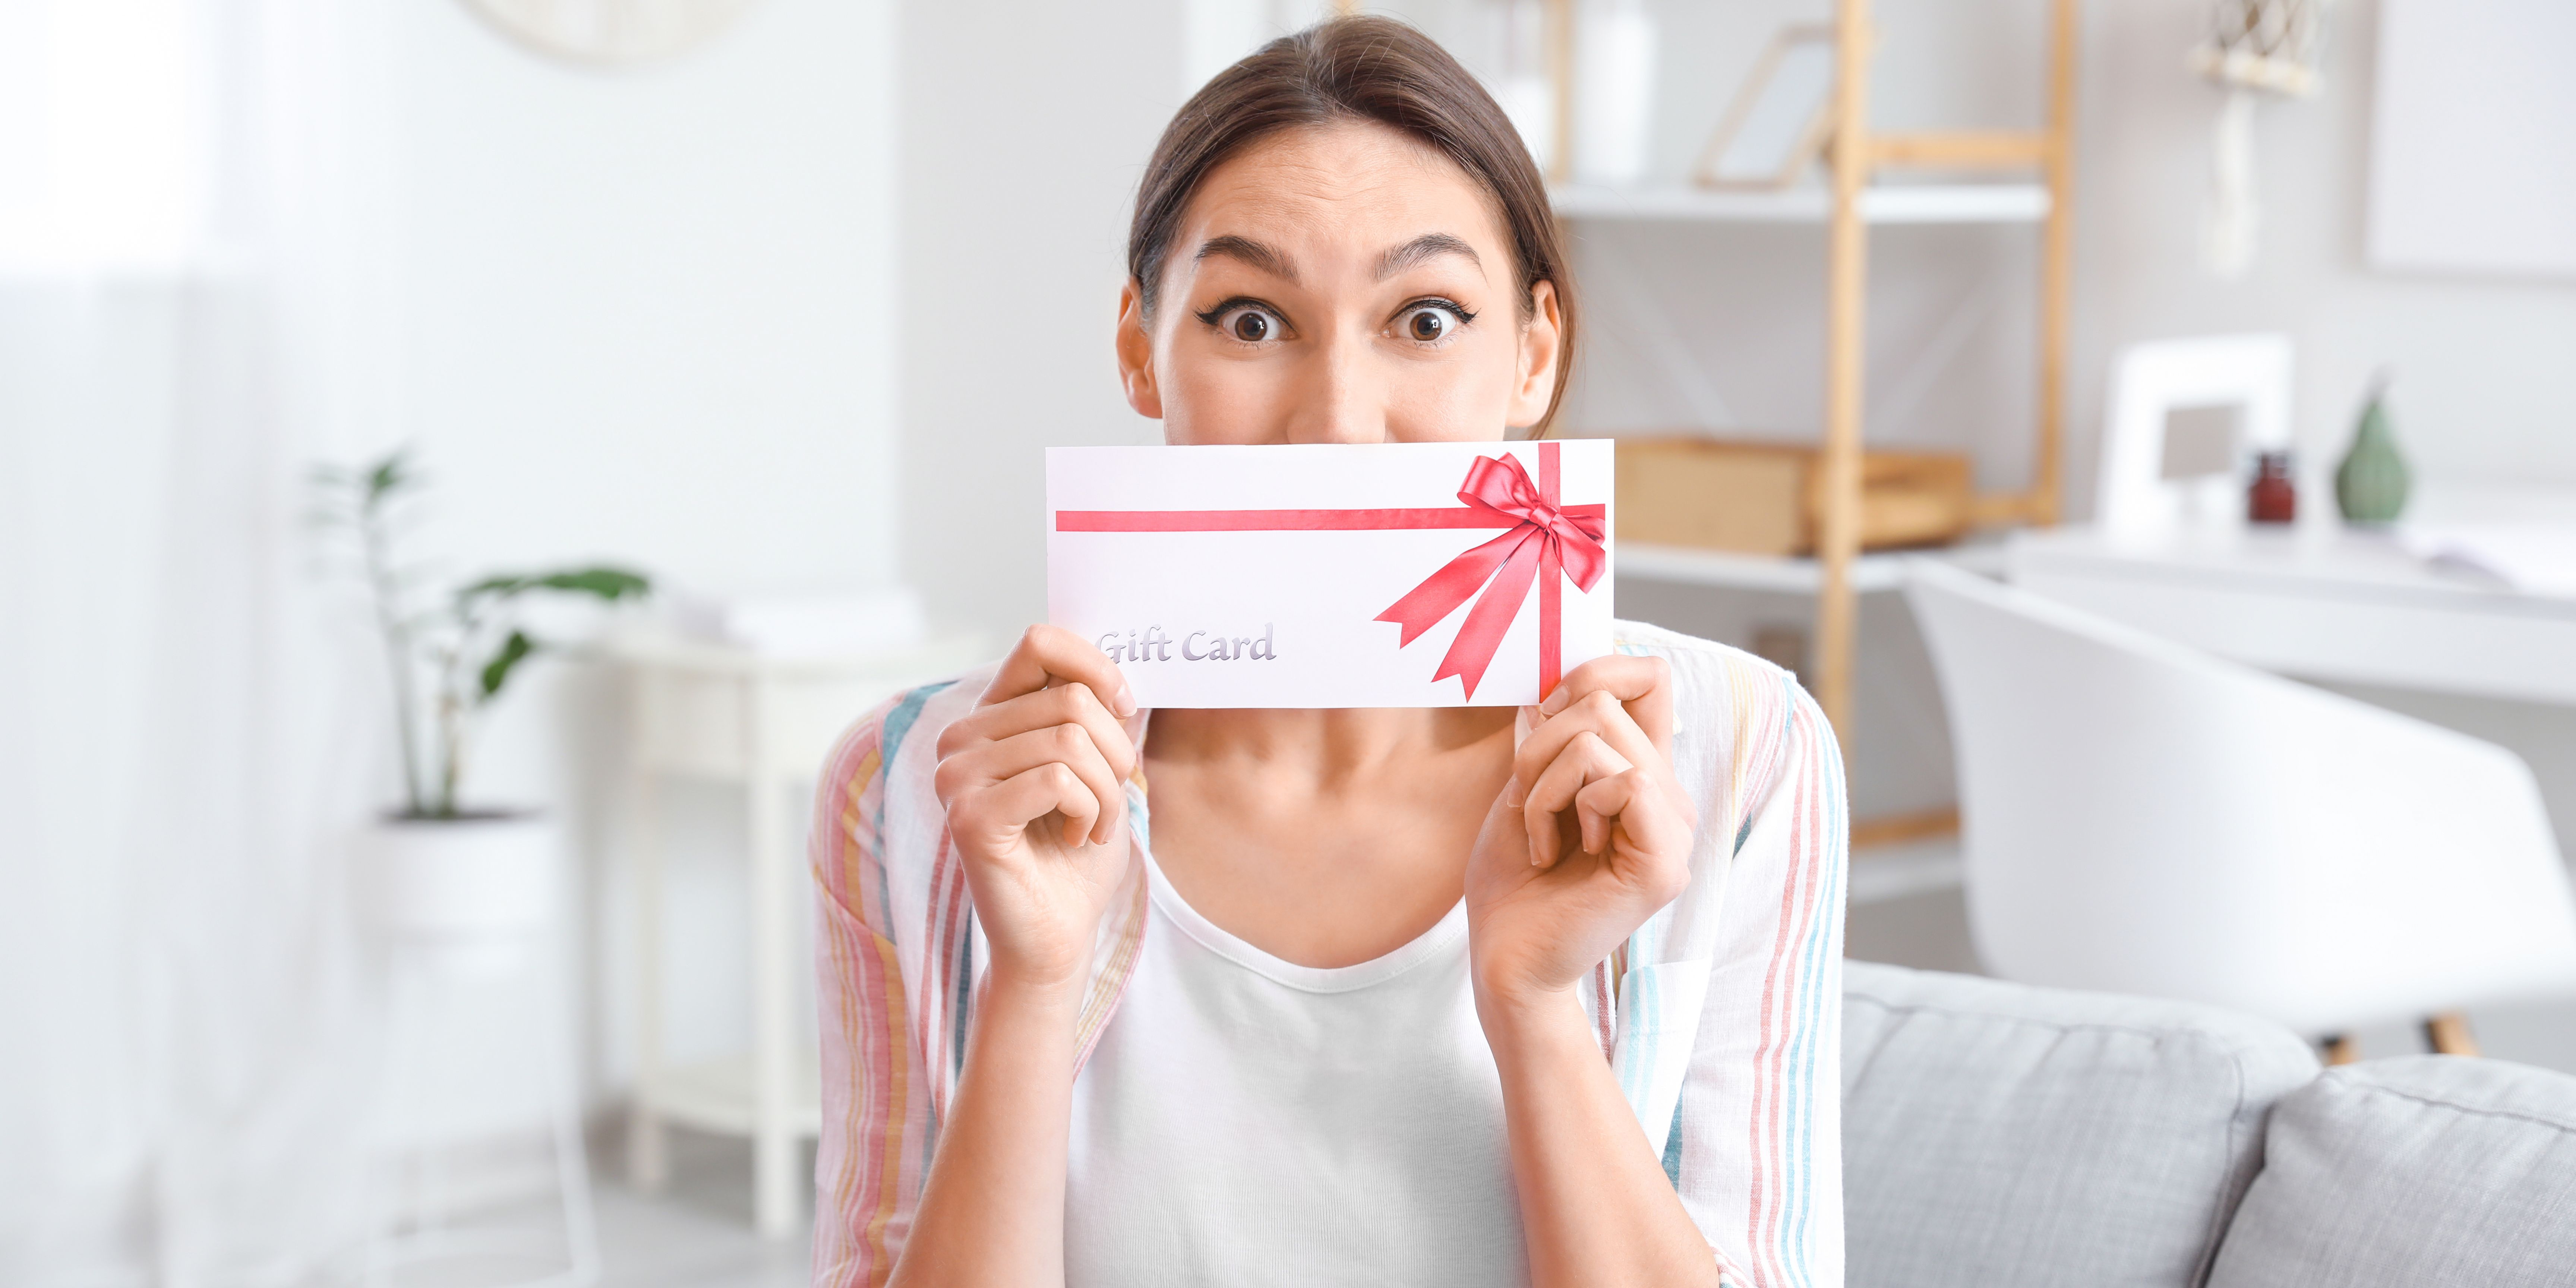 What Is a Gift Card Scam?